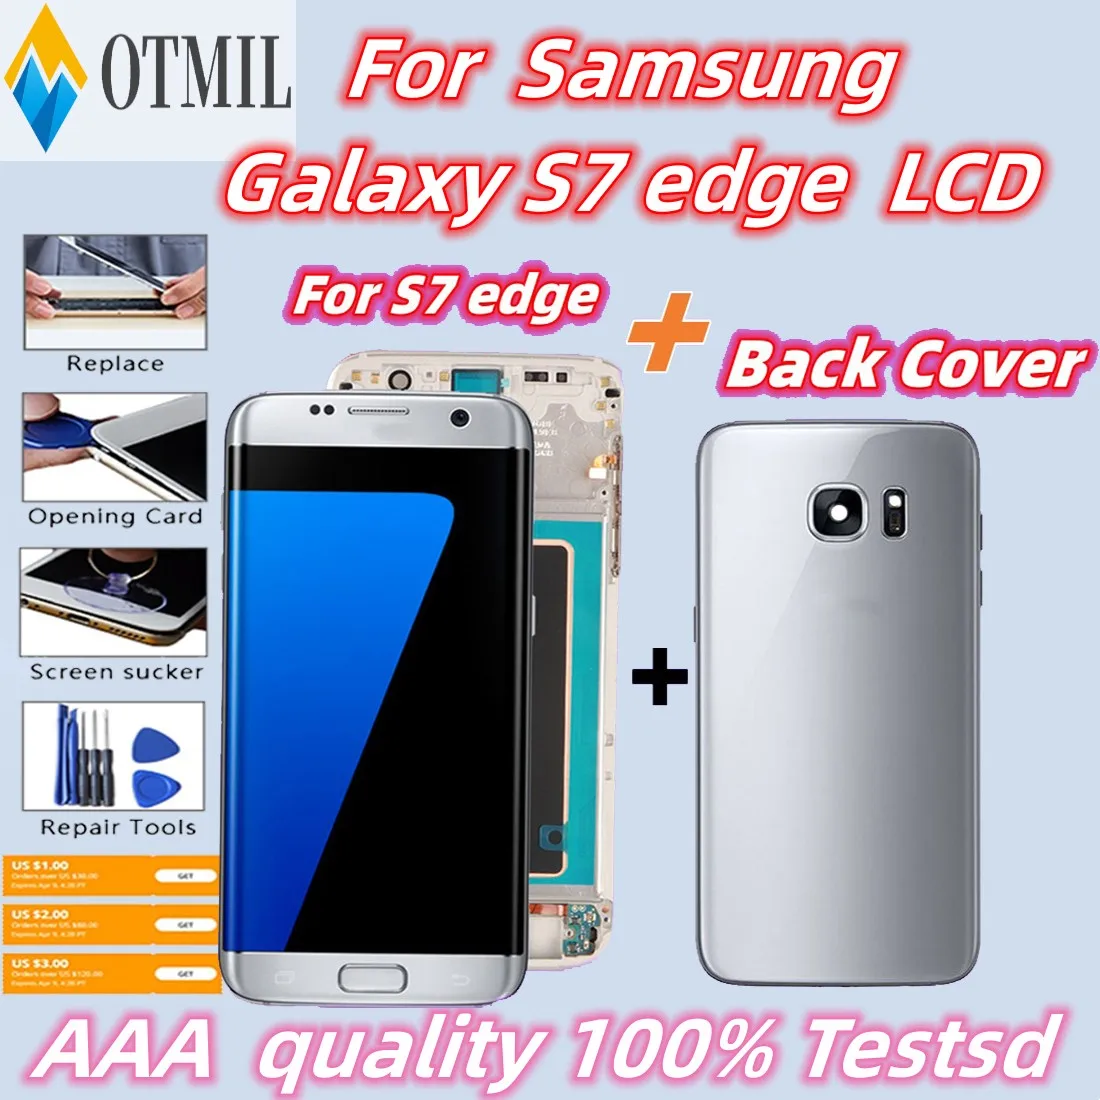 

+++5.5'' Super Amoled LCD With Burn Shadow For Samsung Galaxy S7 edge LCD G935 G935F Touch Screen Digitizer Assembly Replacement